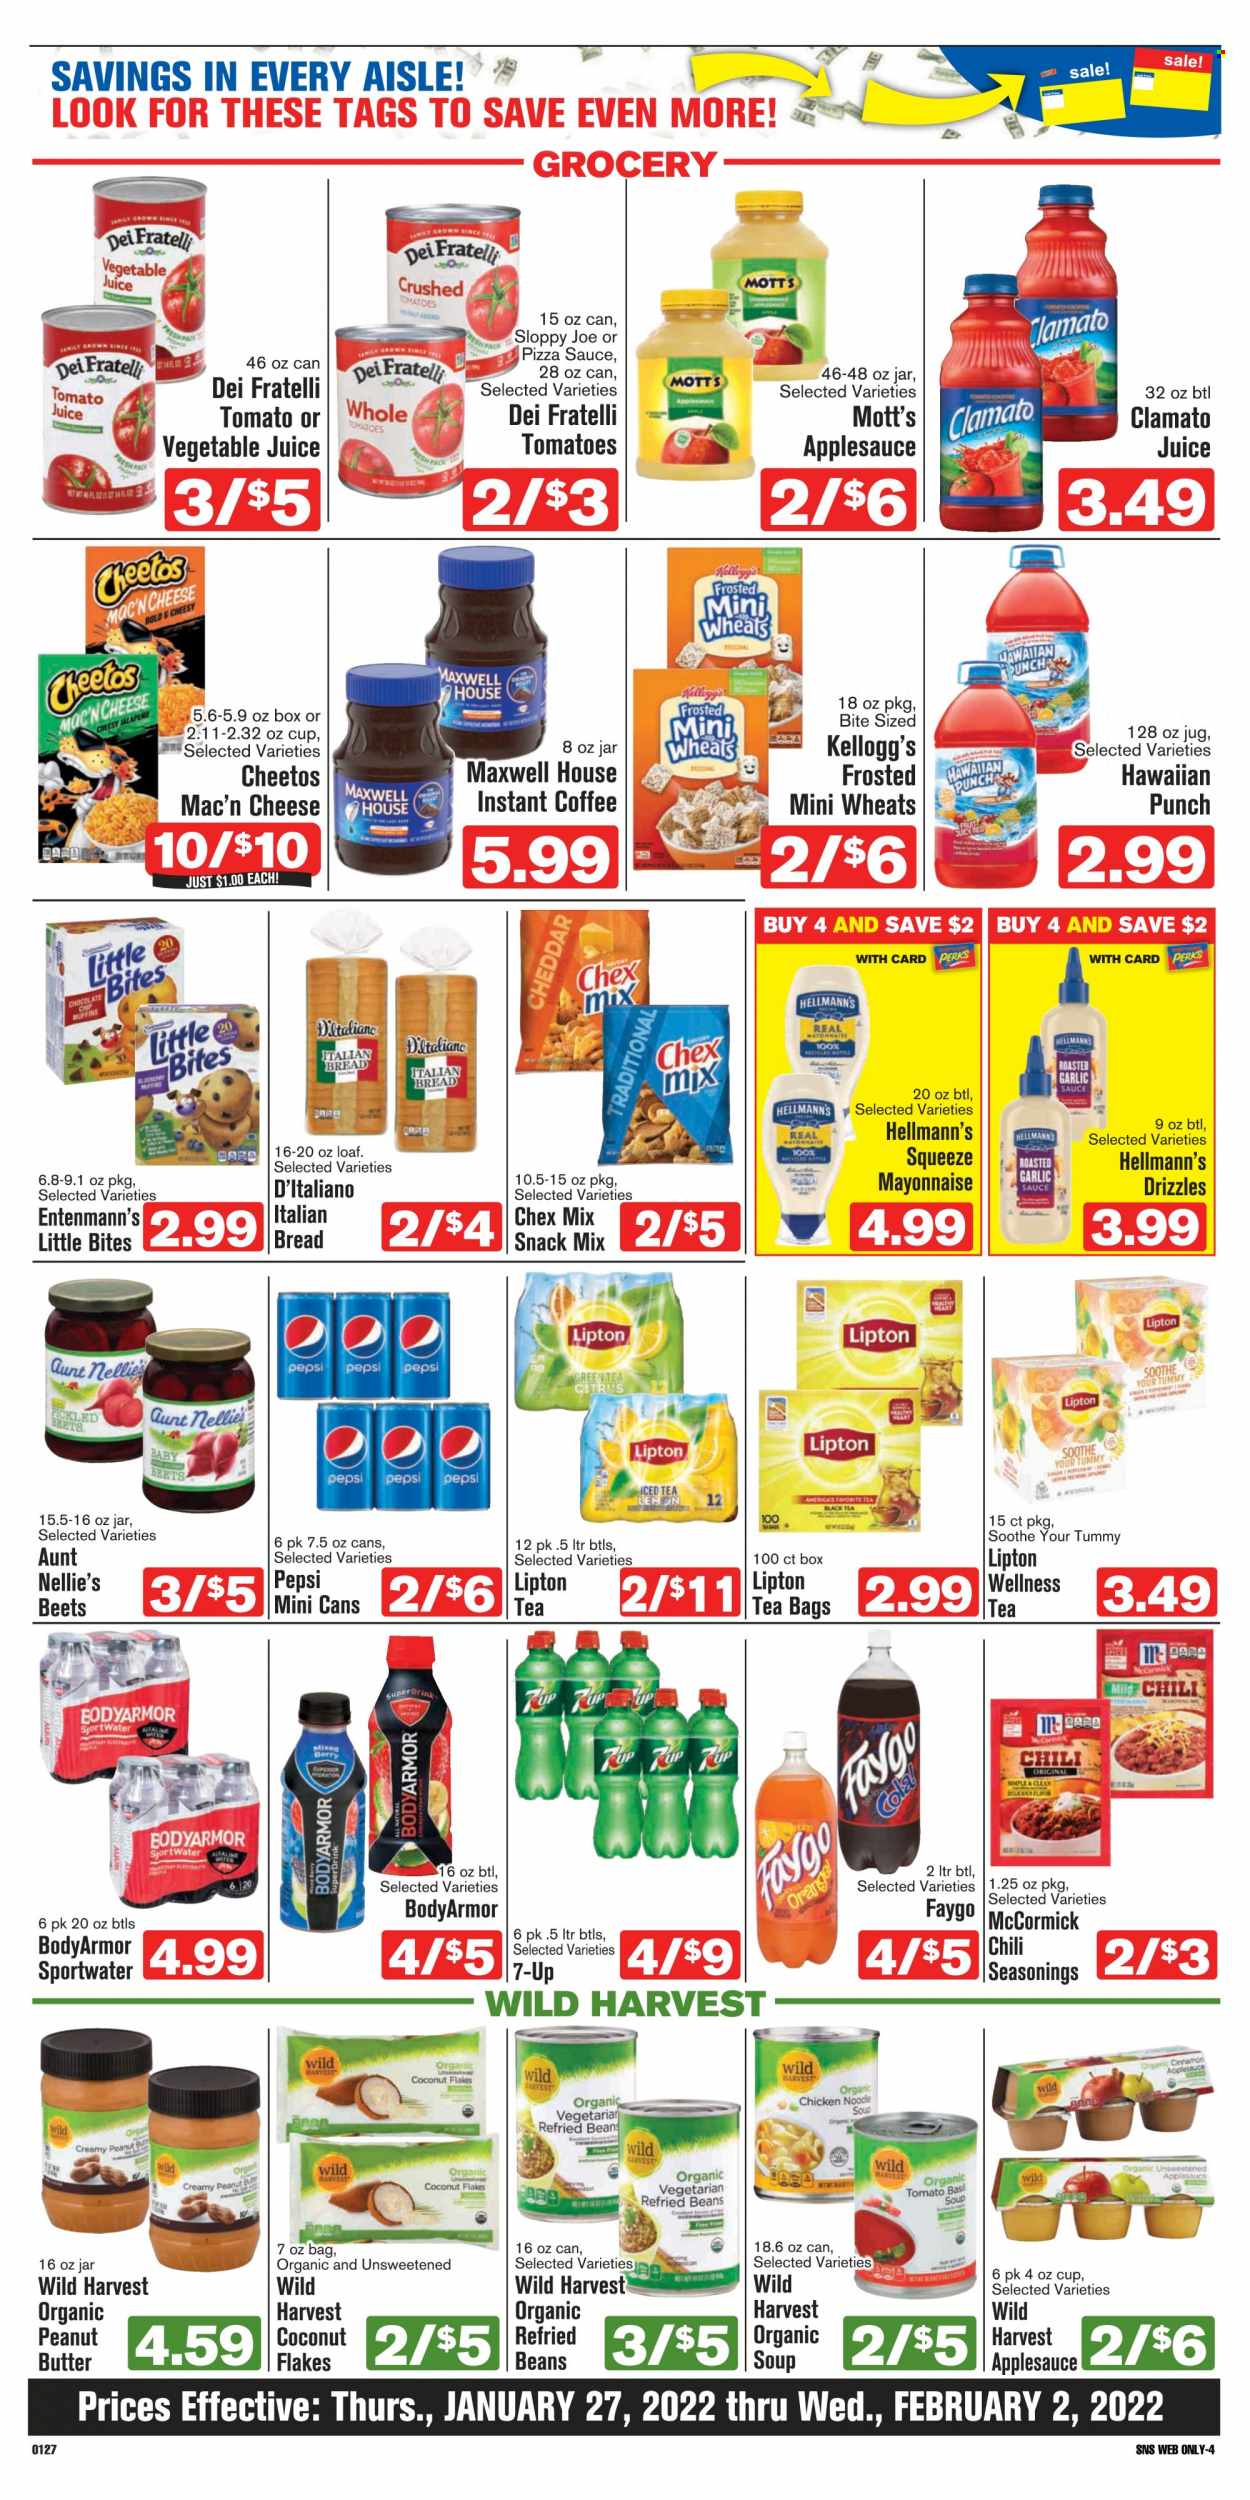 thumbnail - Shop ‘n Save Flyer - 01/27/2022 - 02/02/2022 - Sales products - bread, muffin, Entenmann's, Wild Harvest, oranges, Mott's, soup, MTR, cheddar, mayonnaise, Hellmann’s, chocolate, snack, Kellogg's, Little Bites, Cheetos, Chex Mix, crushed tomatoes, refried beans, cinnamon, apple sauce, peanut butter, flaked coconut, tomato juice, Pepsi, juice, Lipton, Clamato, 7UP, vegetable juice, green tea, Maxwell House, tea bags, instant coffee. Page 6.